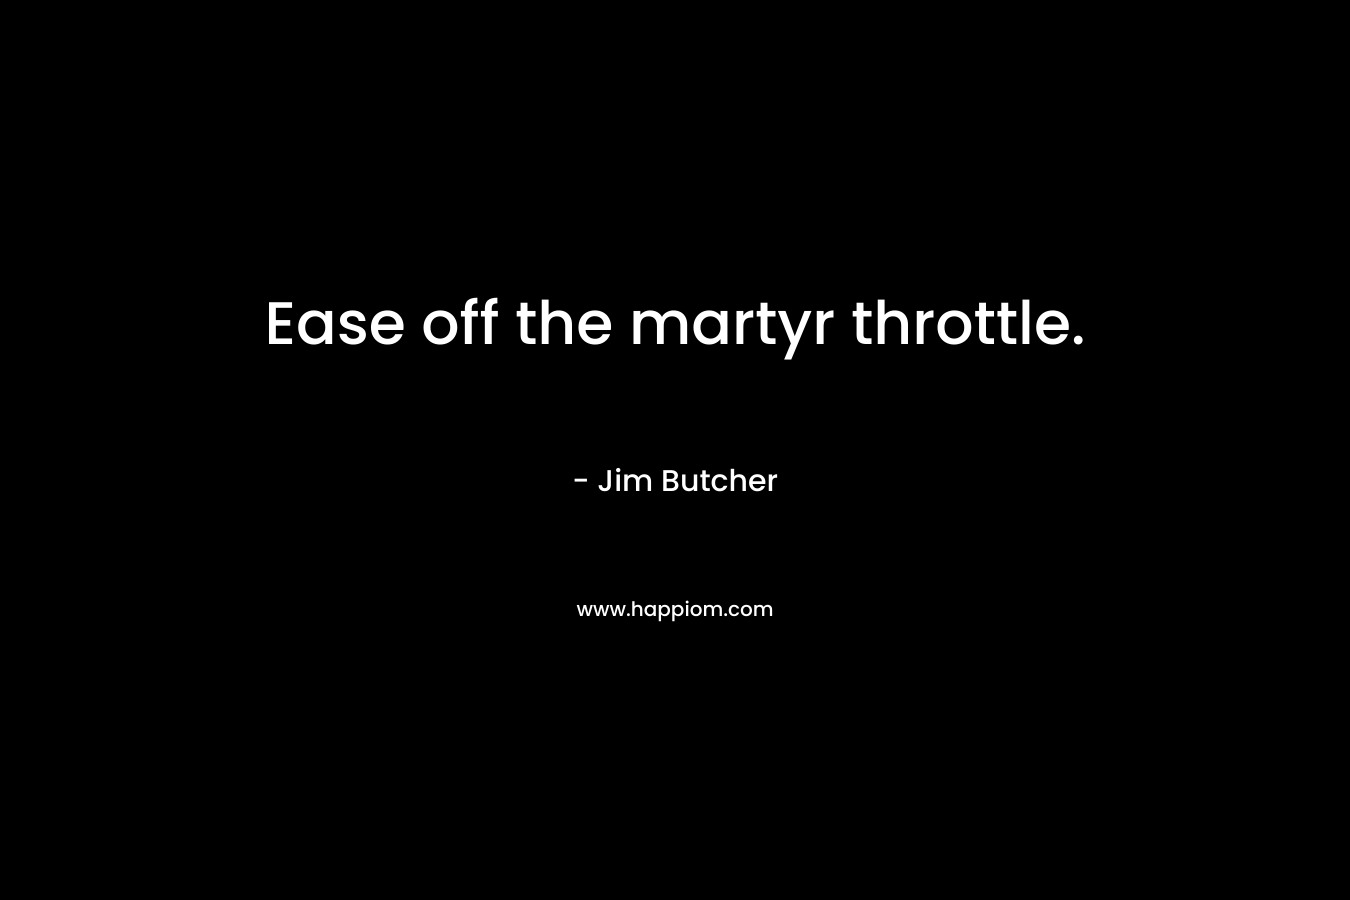 Ease off the martyr throttle.